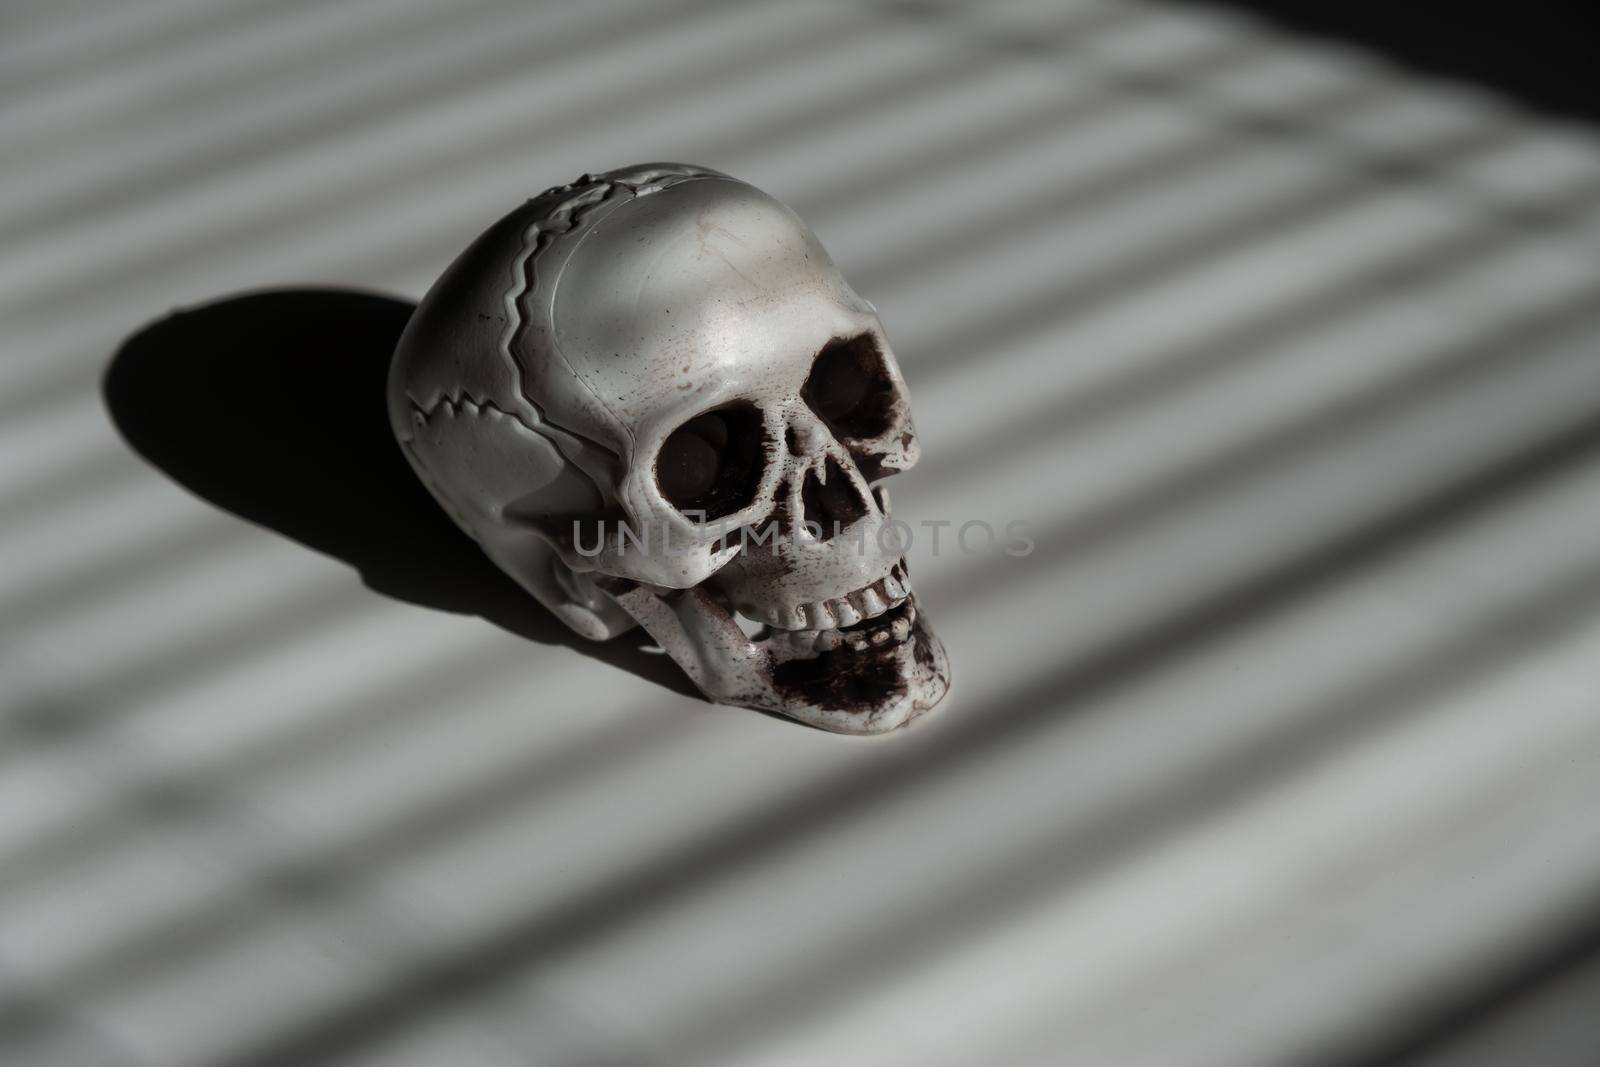 Blinds shadow on a plastic skull on a white table by mrwed54